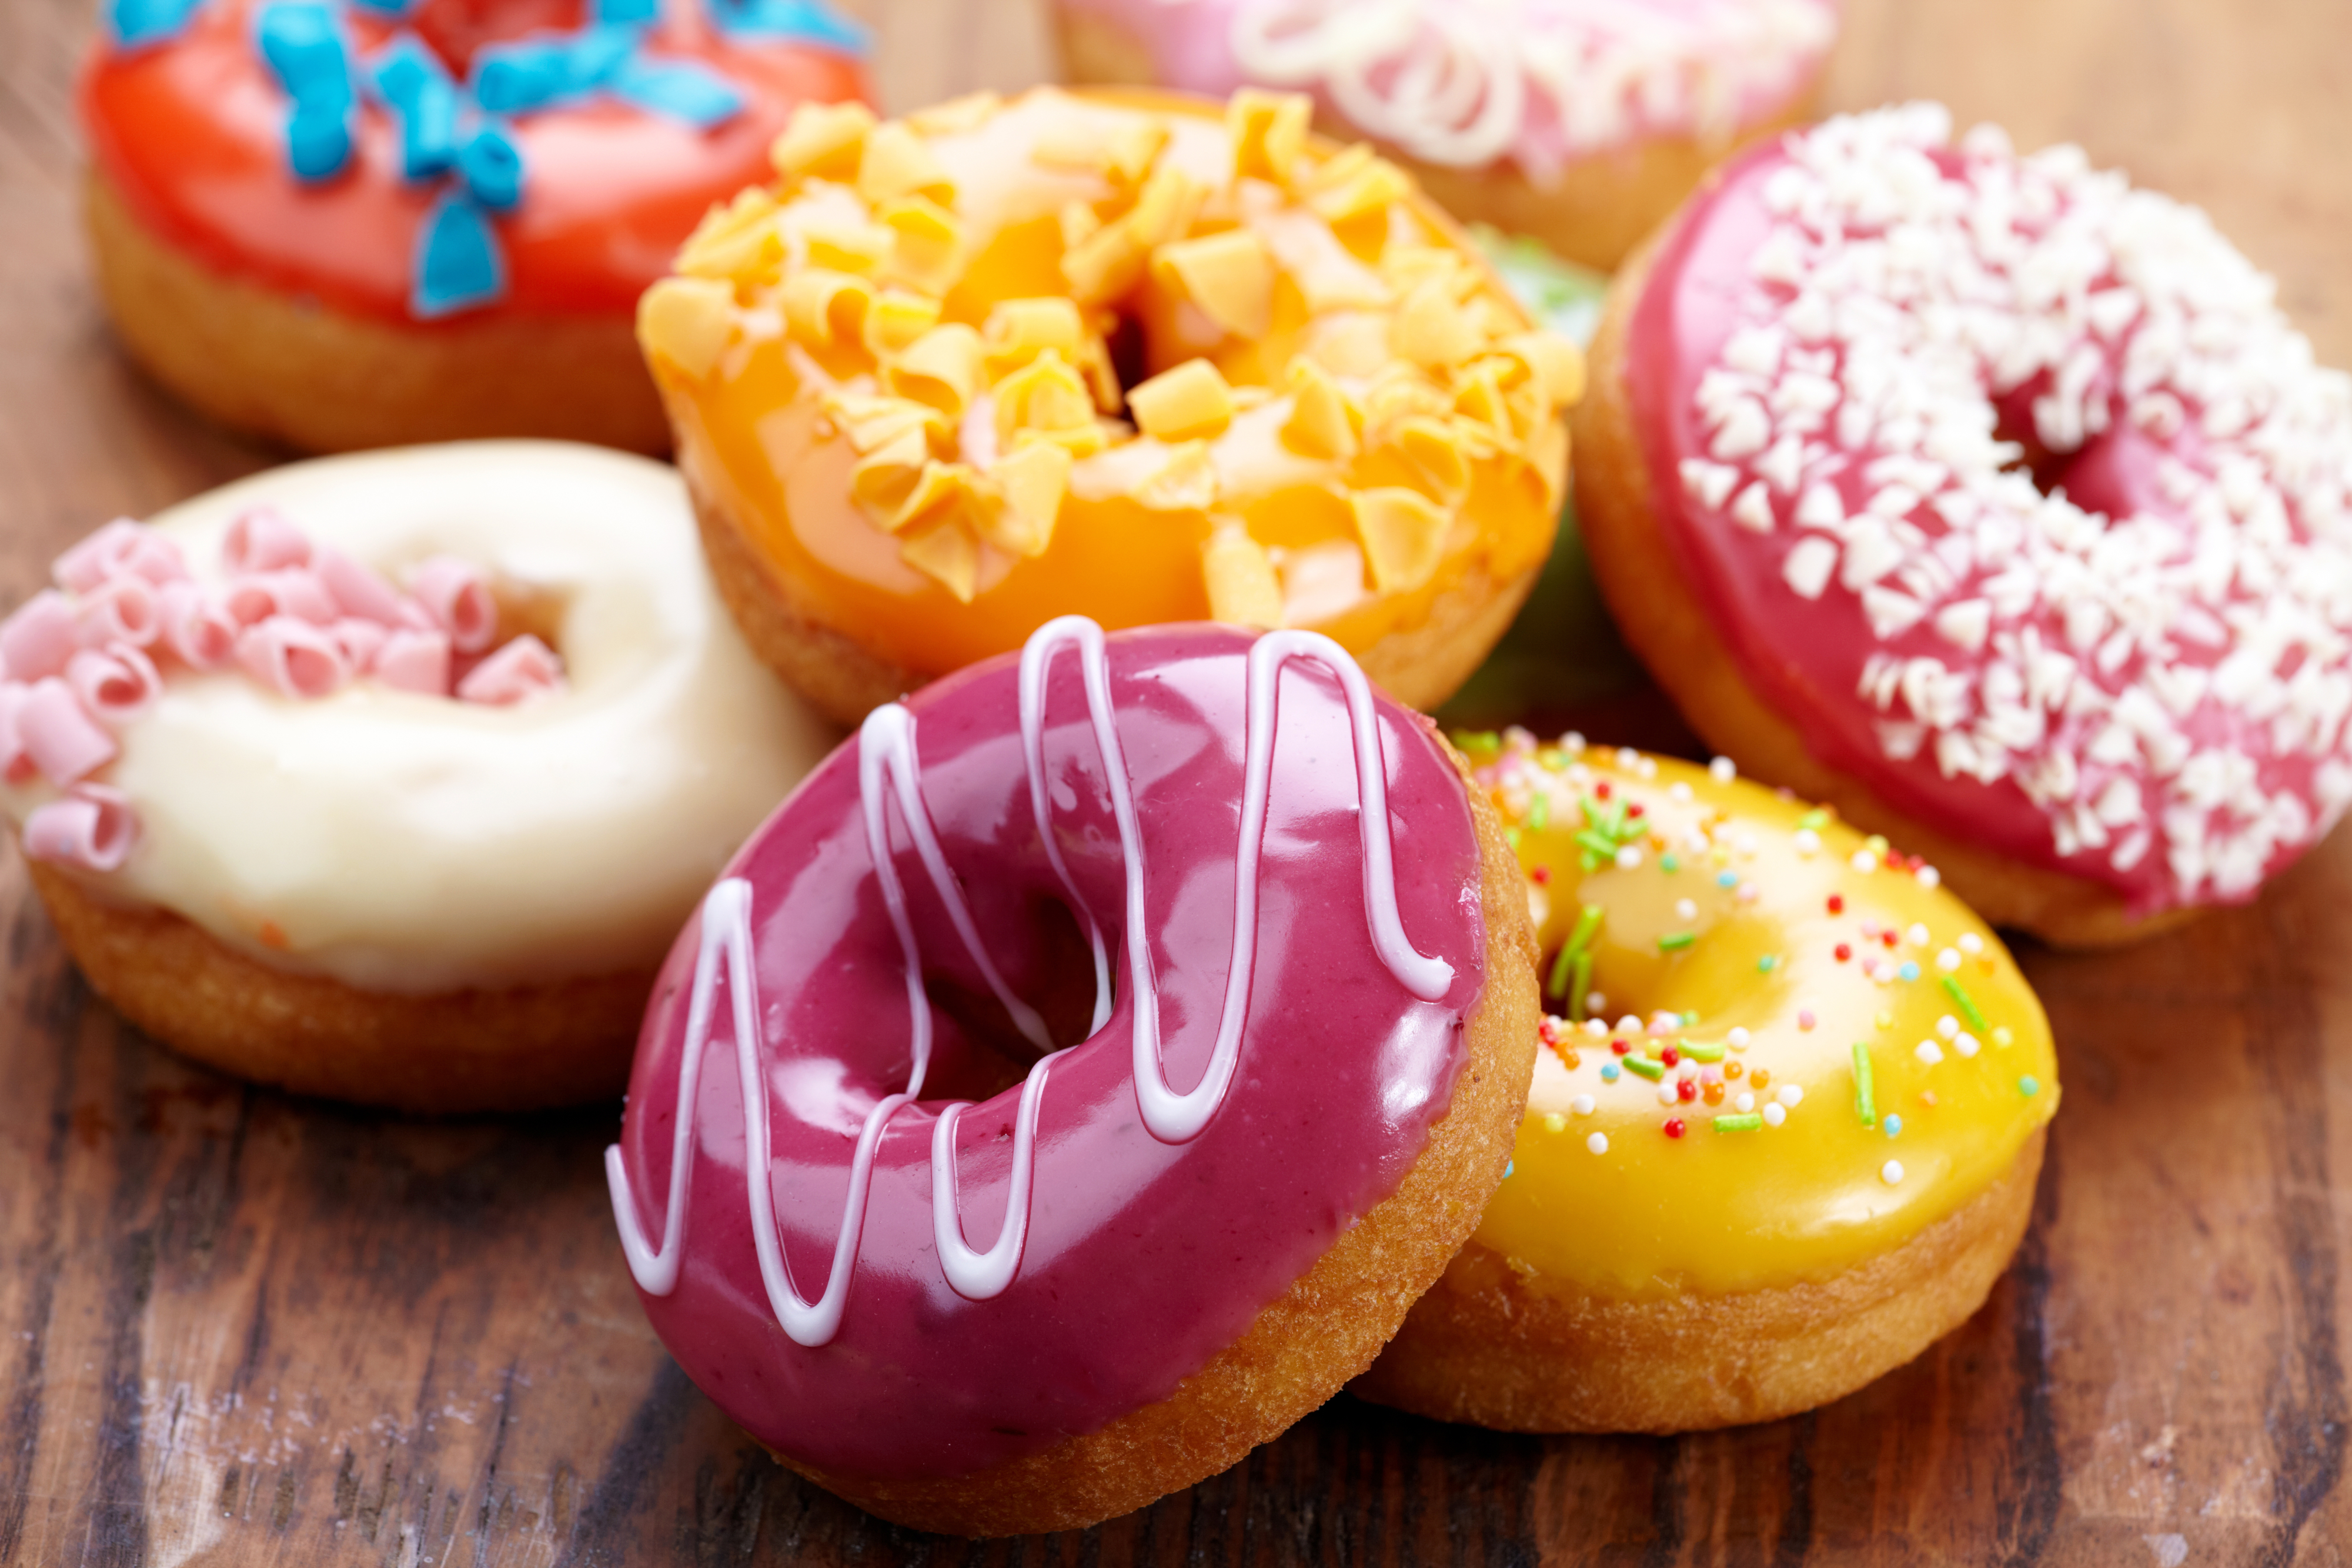 A variety of donuts with different icings and toppings are shown on a wooden surface